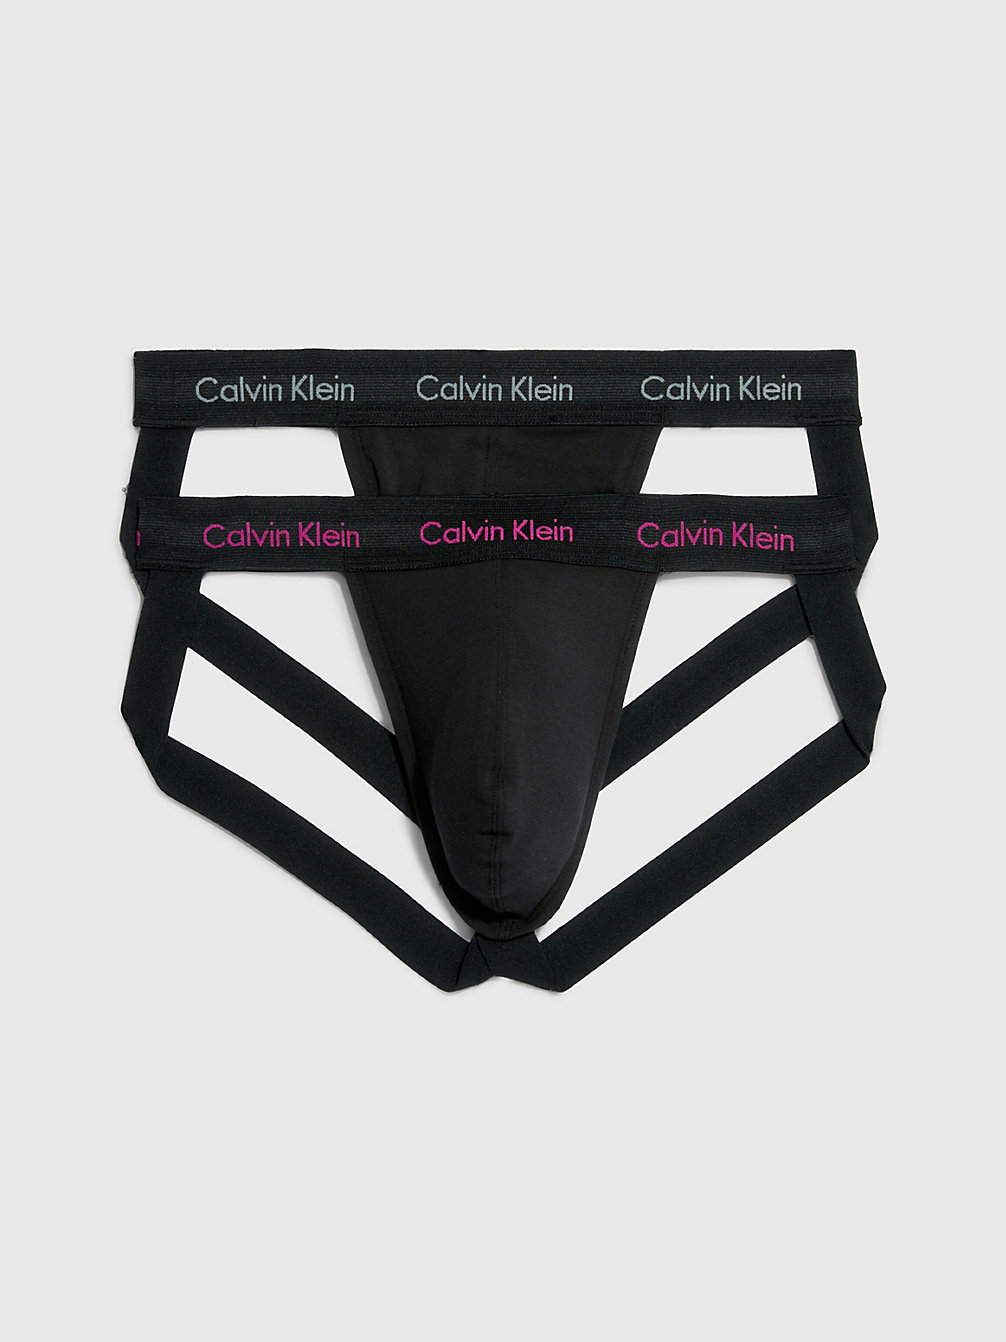 B-SILVER SPRINGS, PALACE PINK LOGO Lot De 2 Strings - Cotton Stretch undefined hommes Calvin Klein